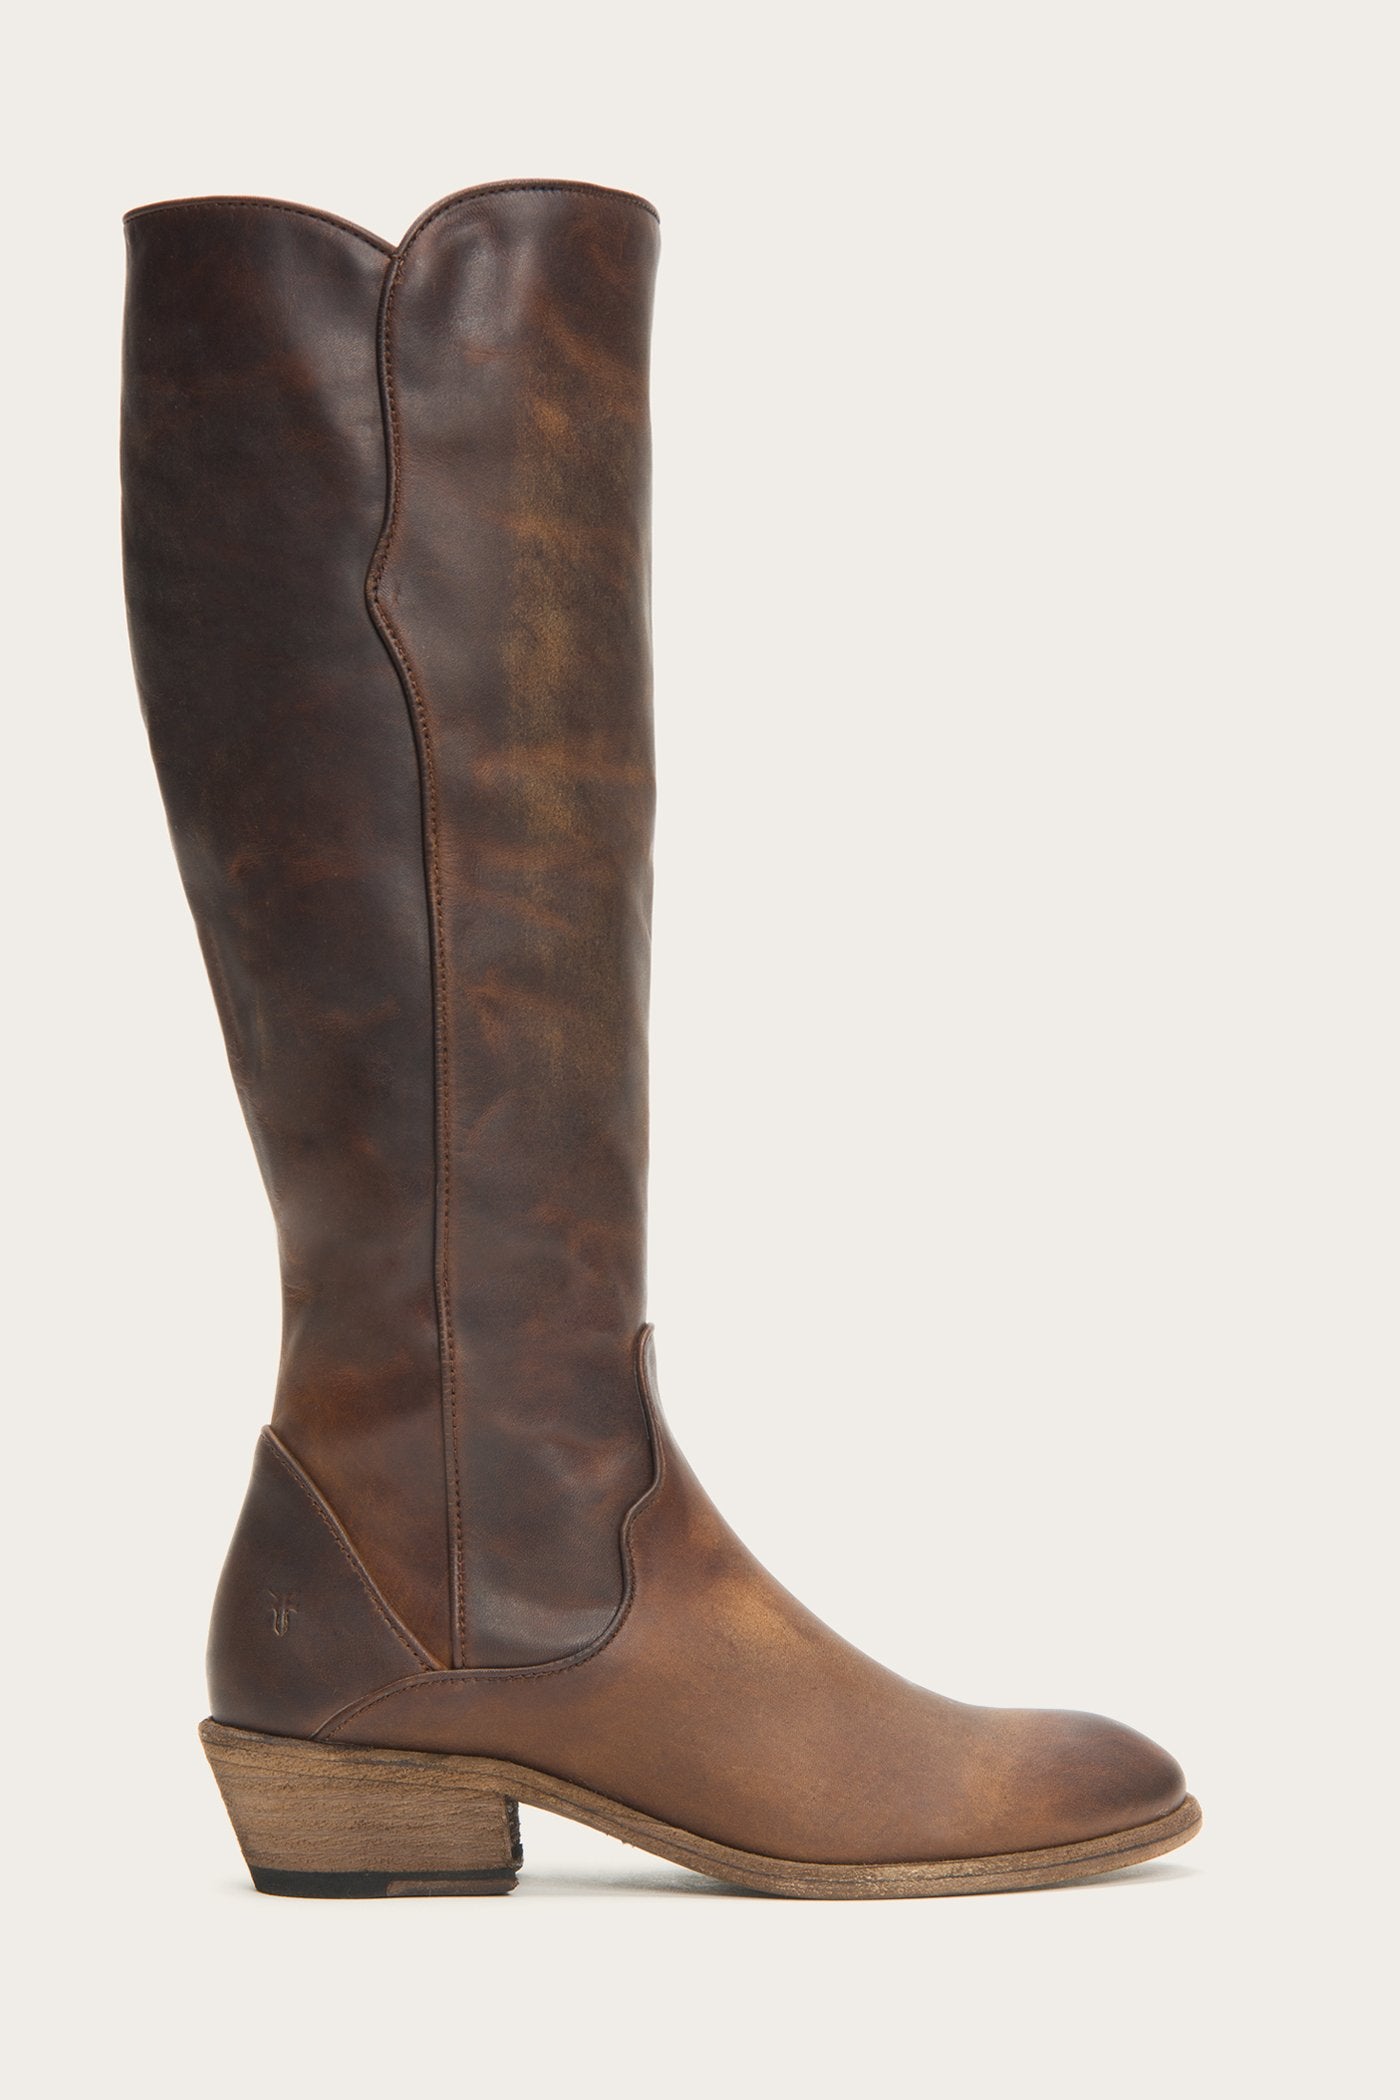 Frye Carson Piping Tall Boots